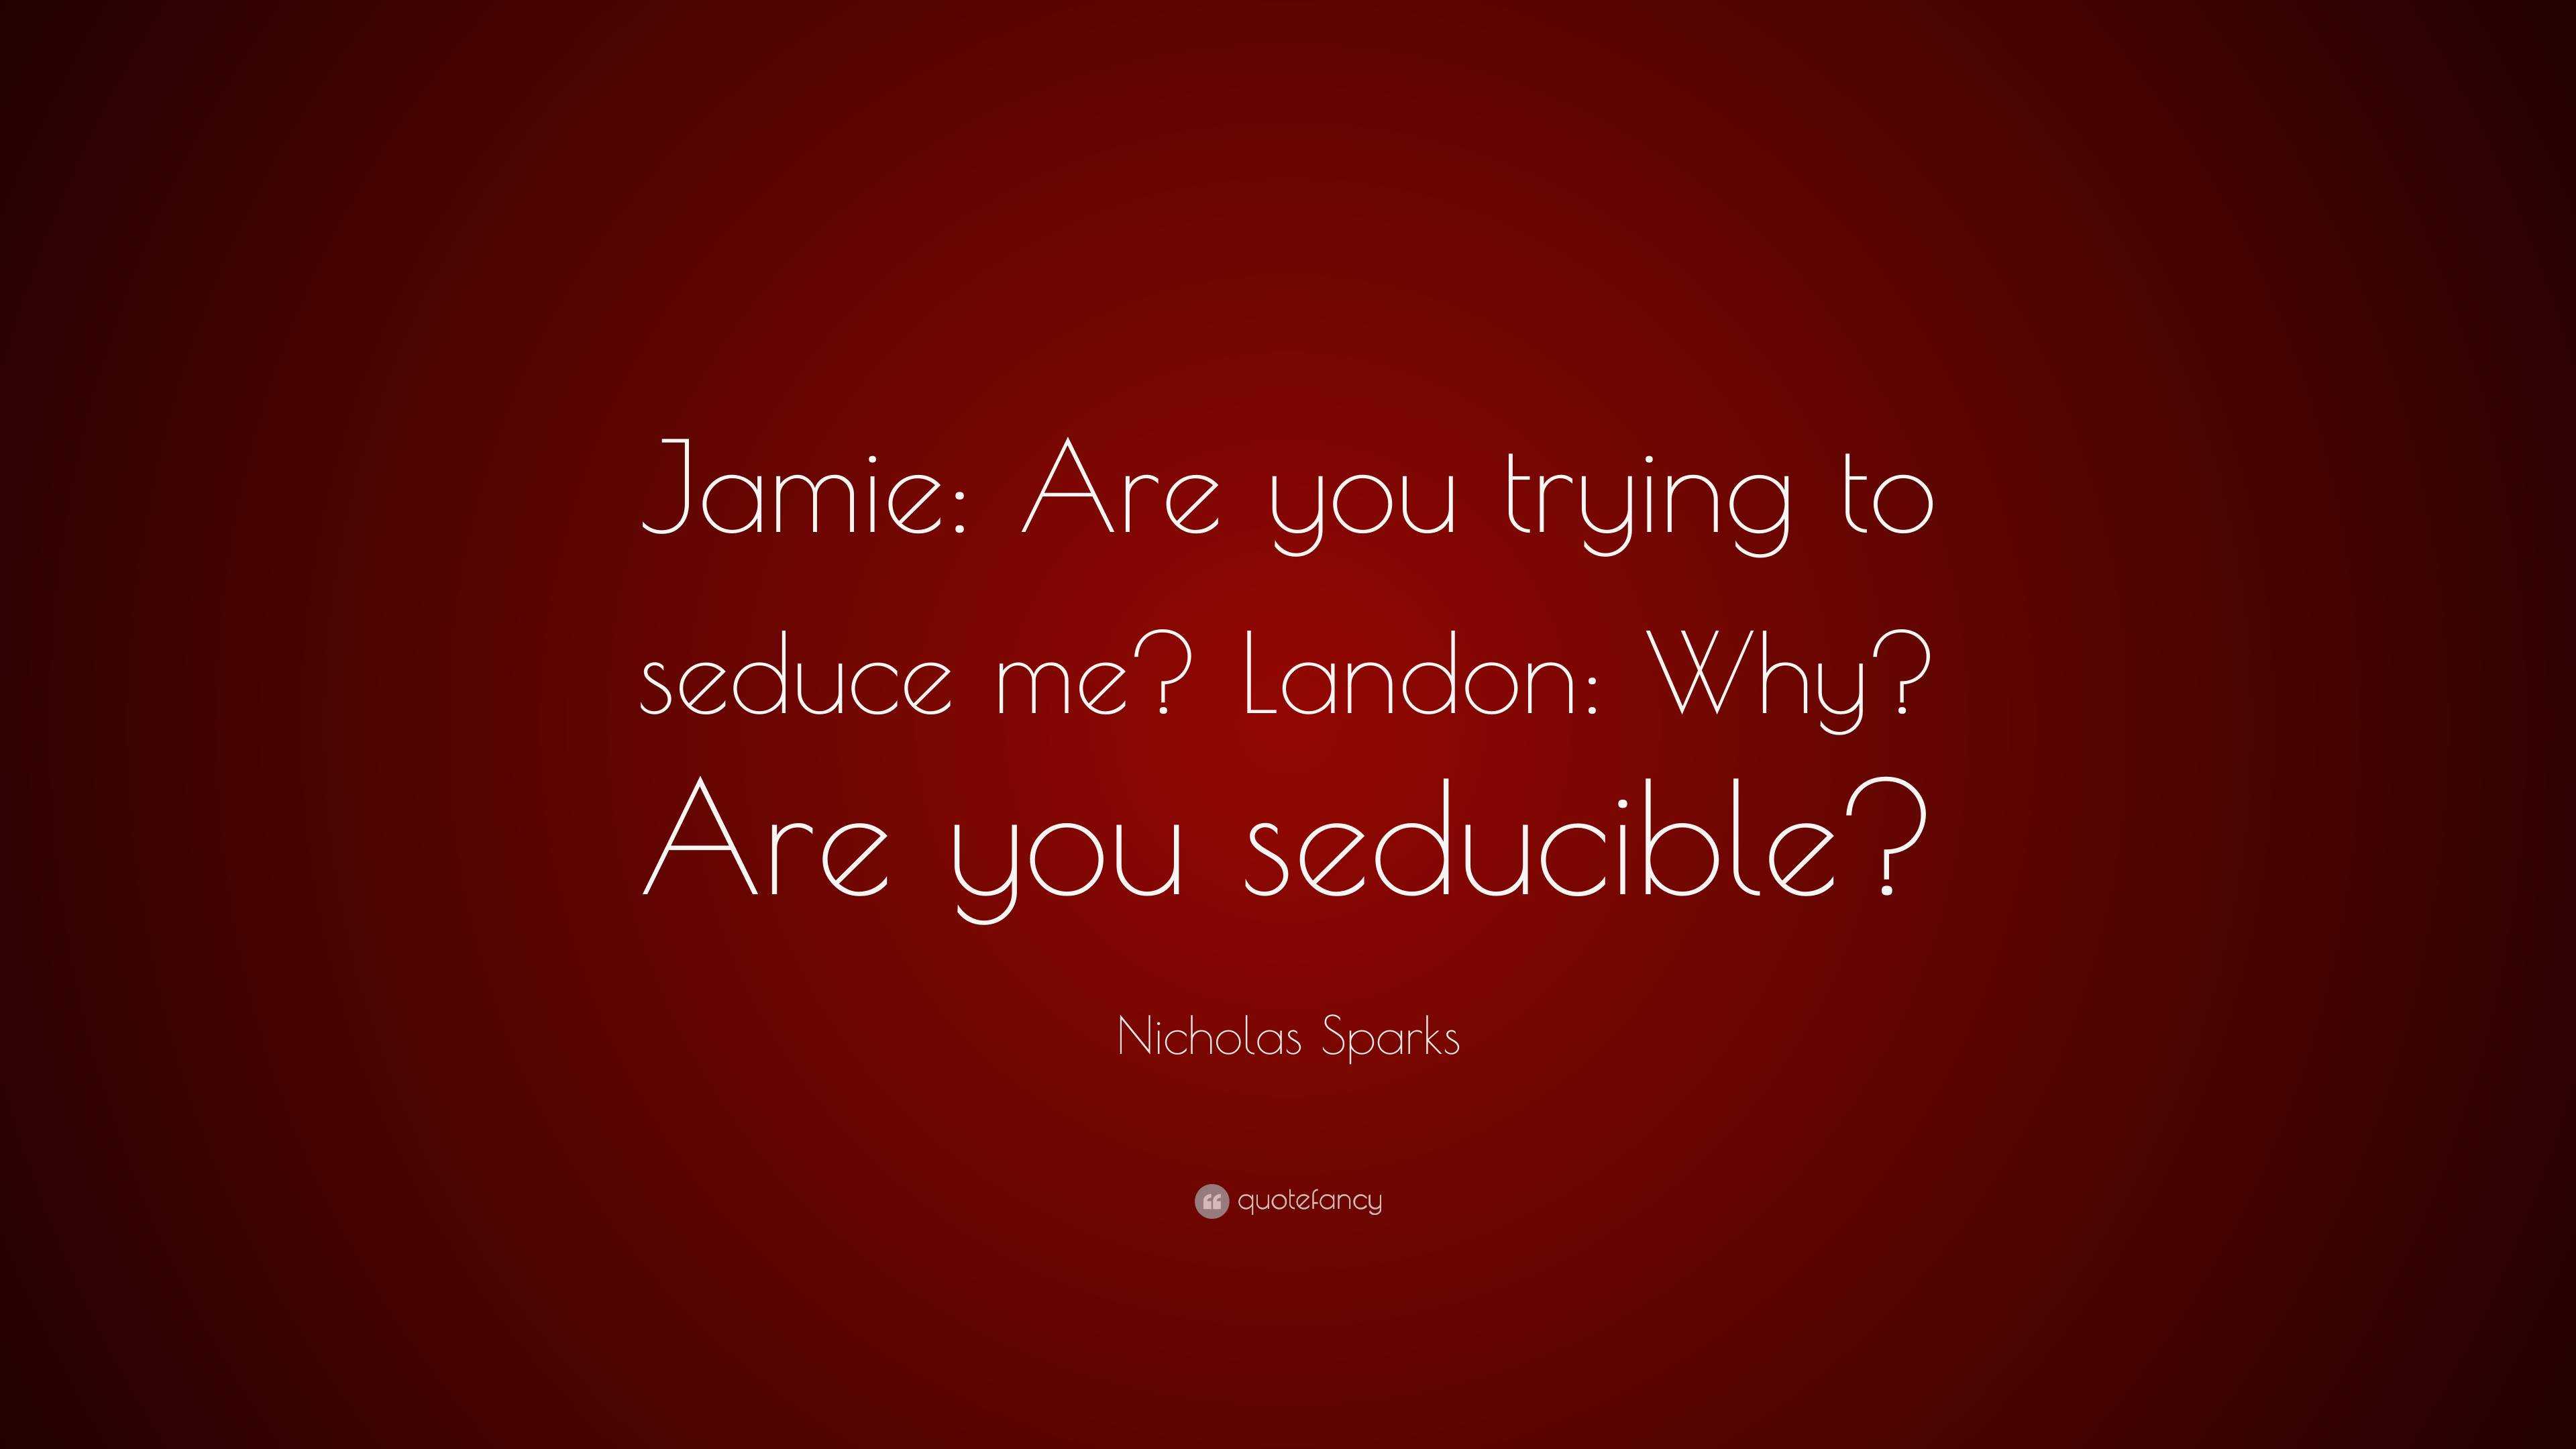 Nicholas Sparks Quote “jamie Are You Trying To Seduce Me Landon Why